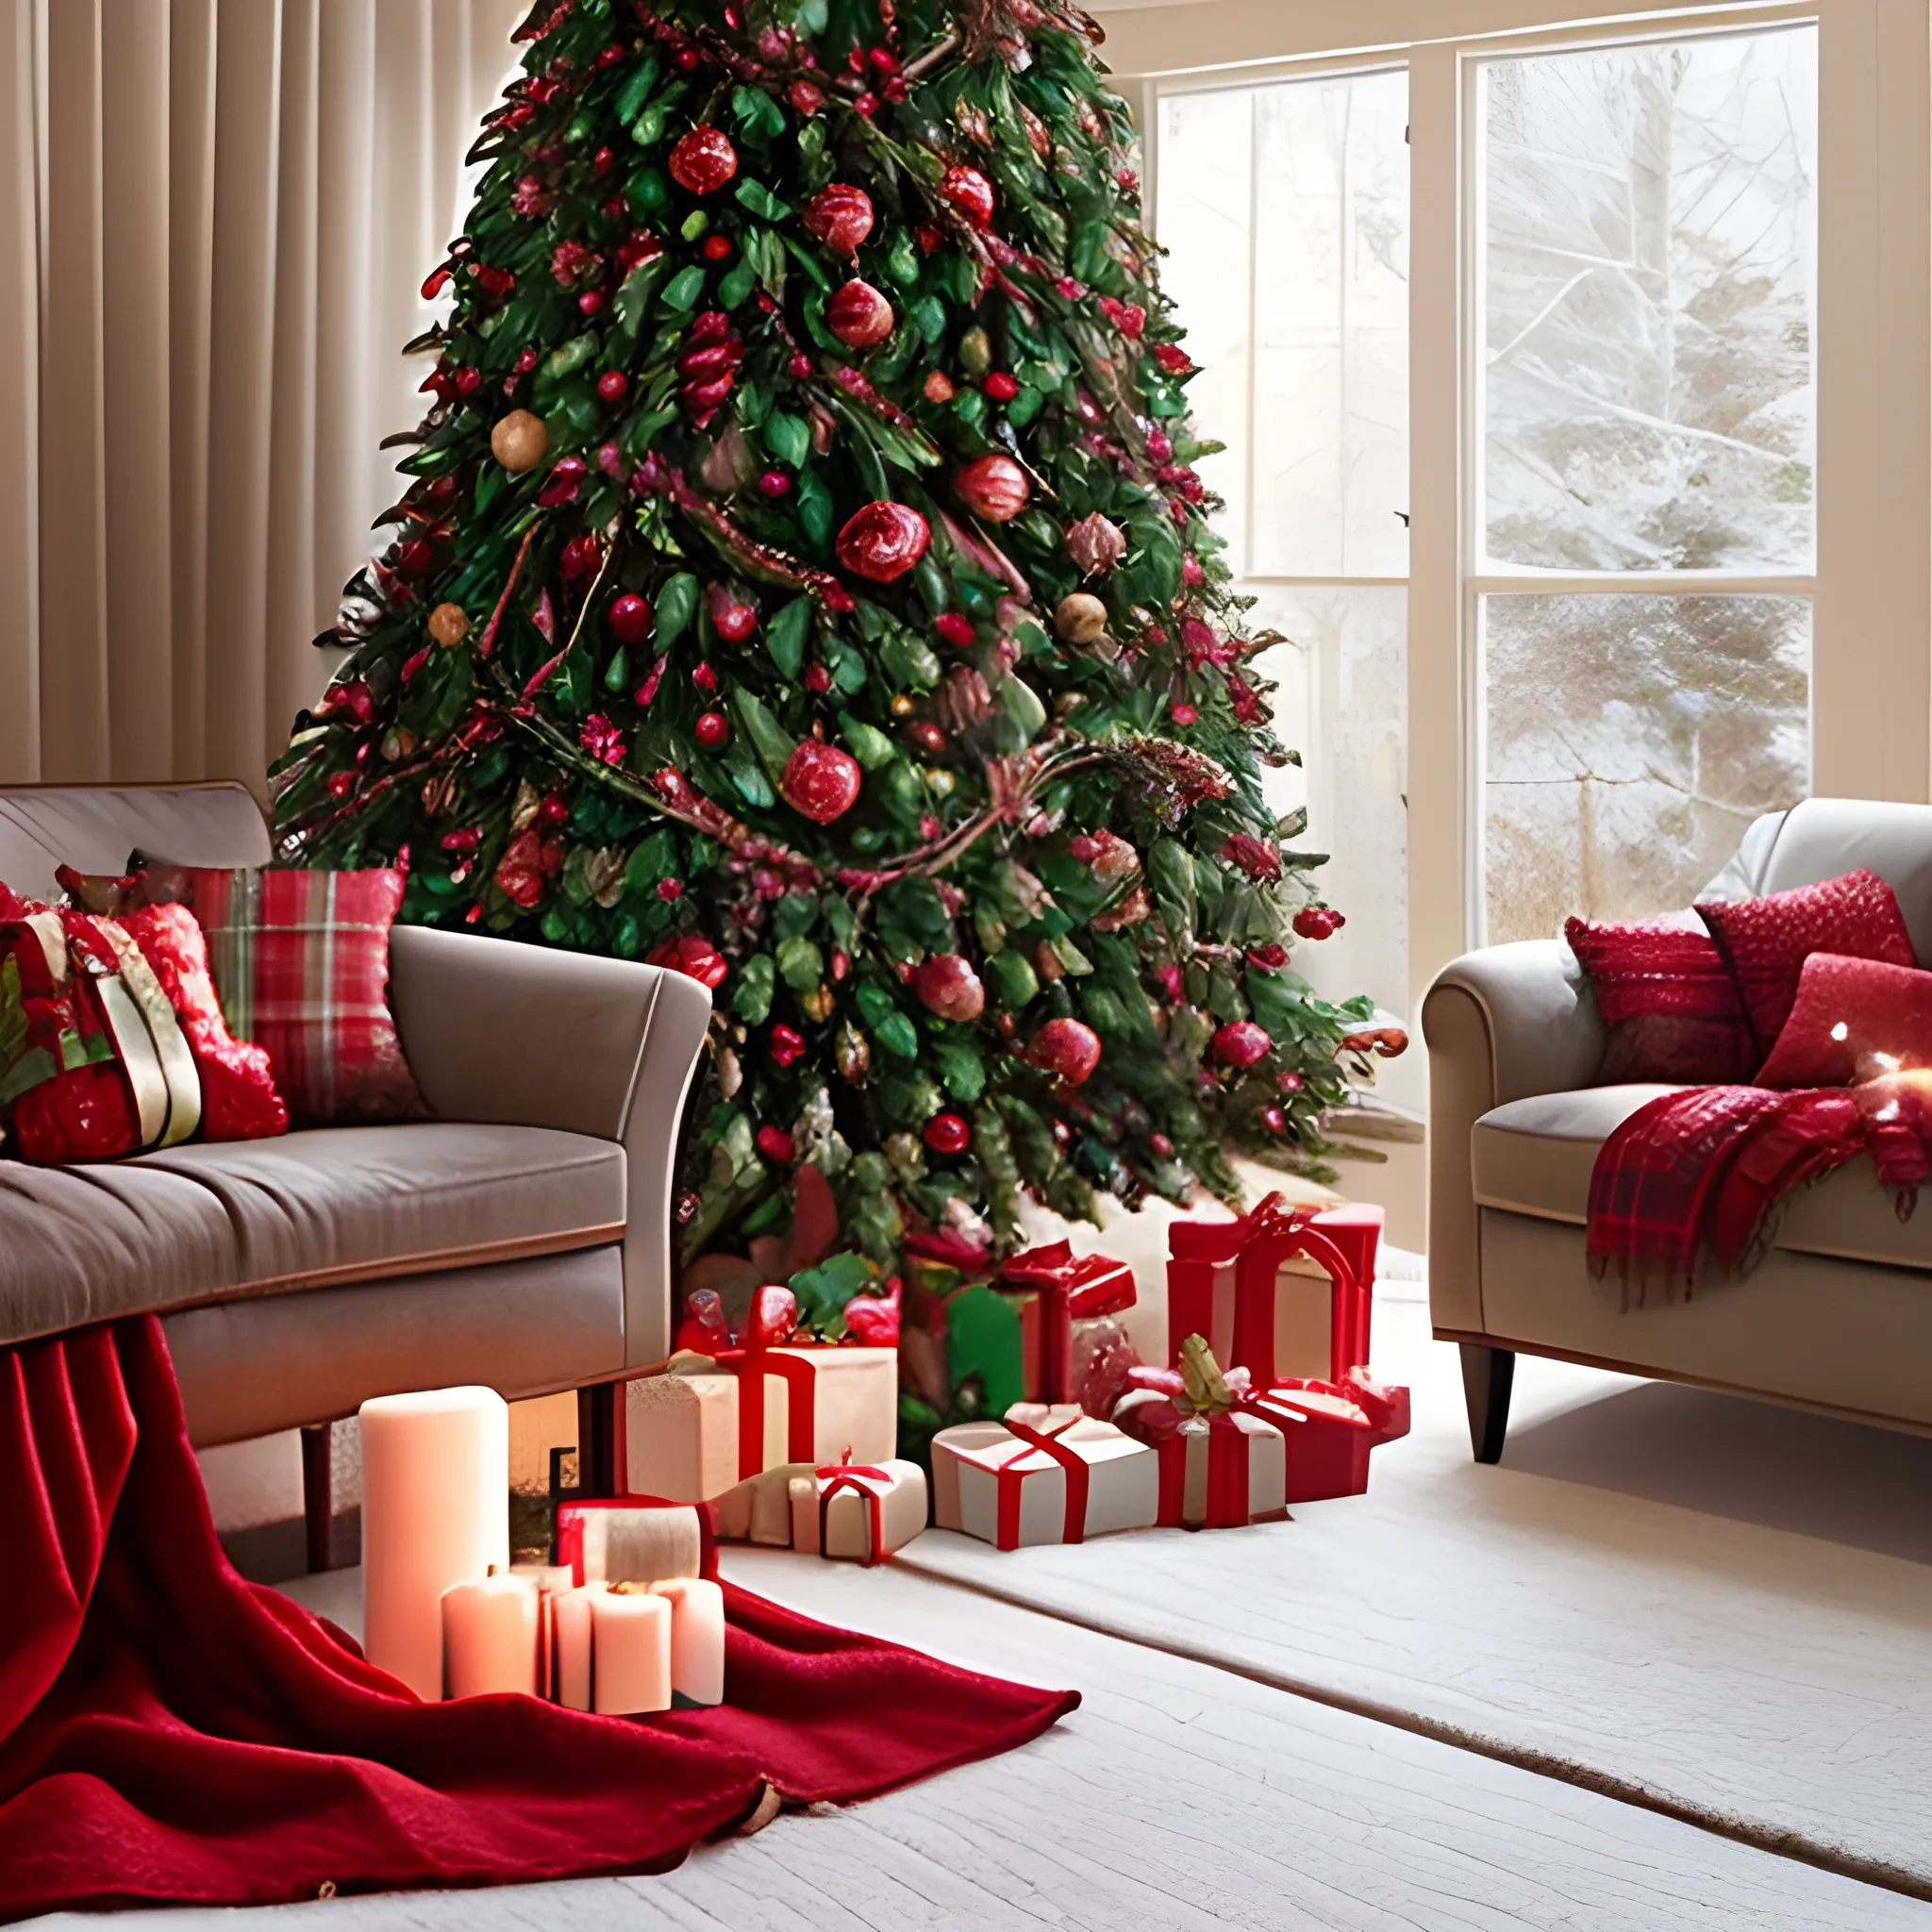 Imagine a beautifully adorned tree, cozy blankets, and the warm ...